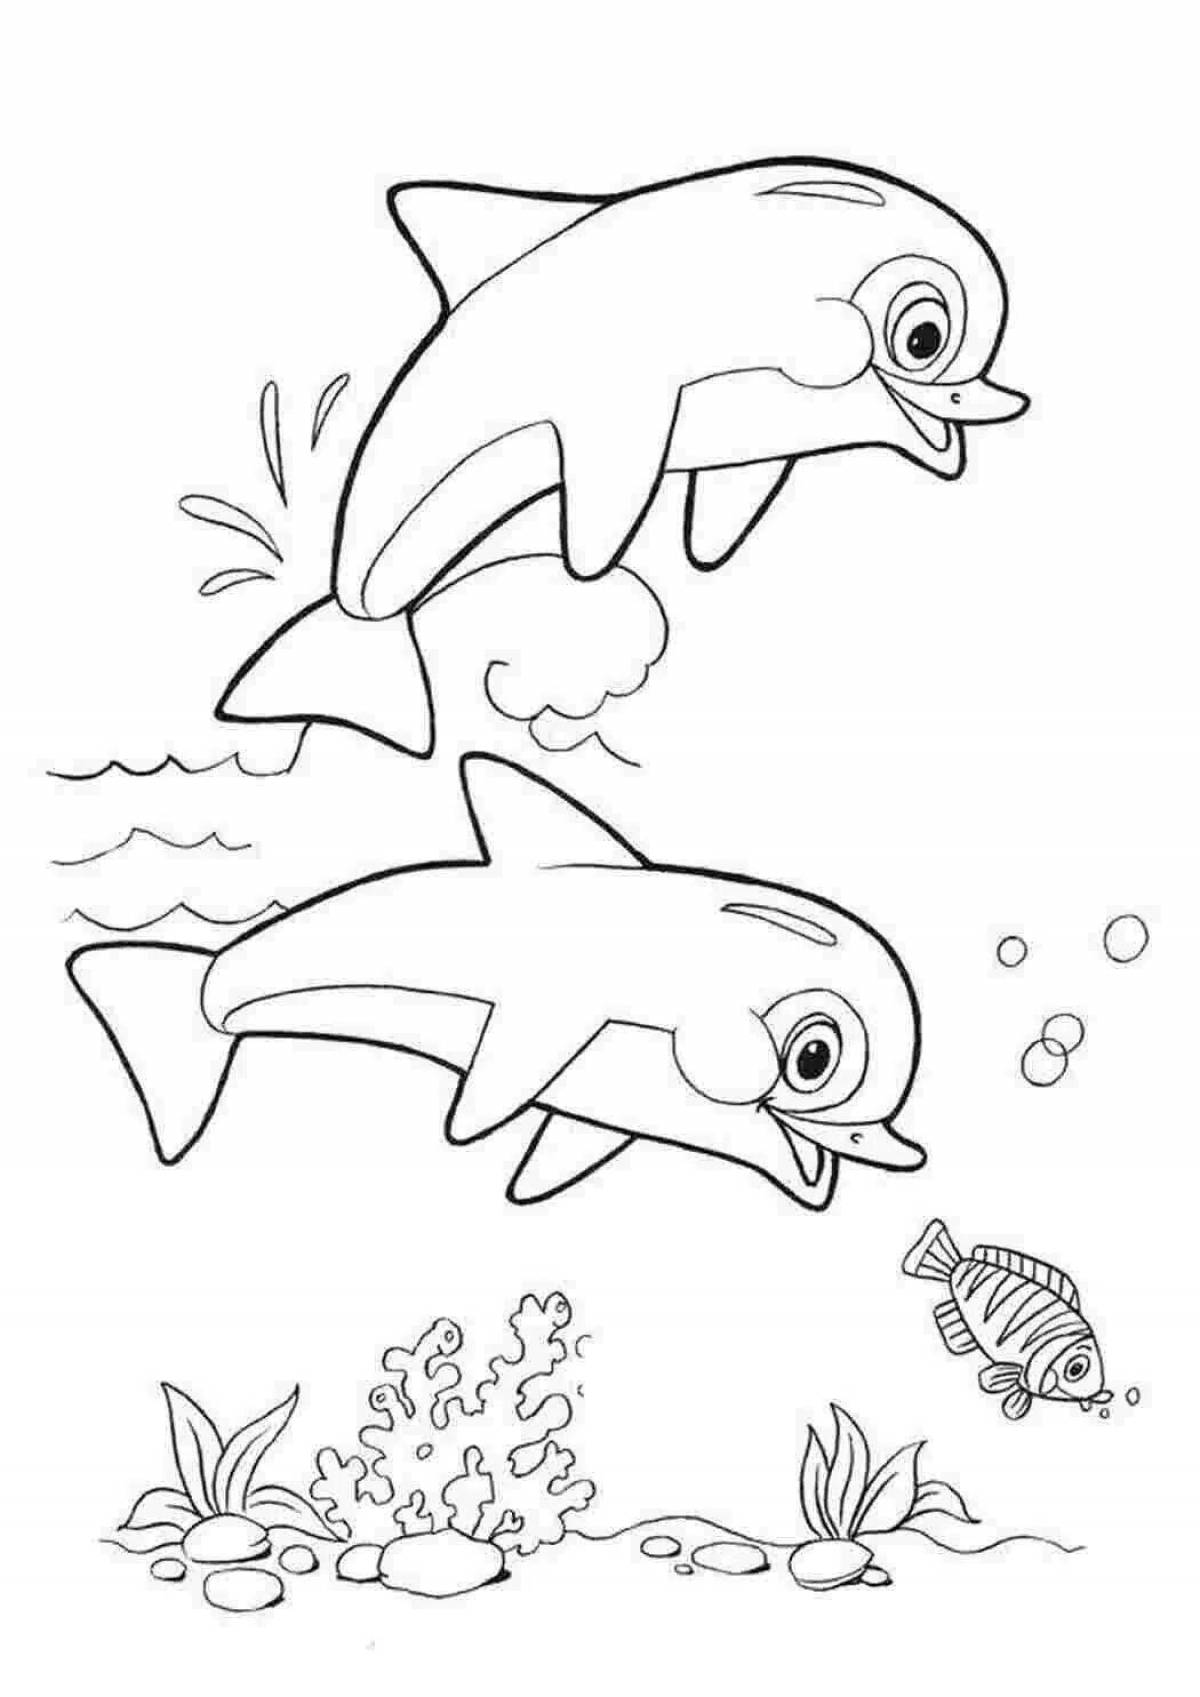 Amazing ocean coloring page for kids